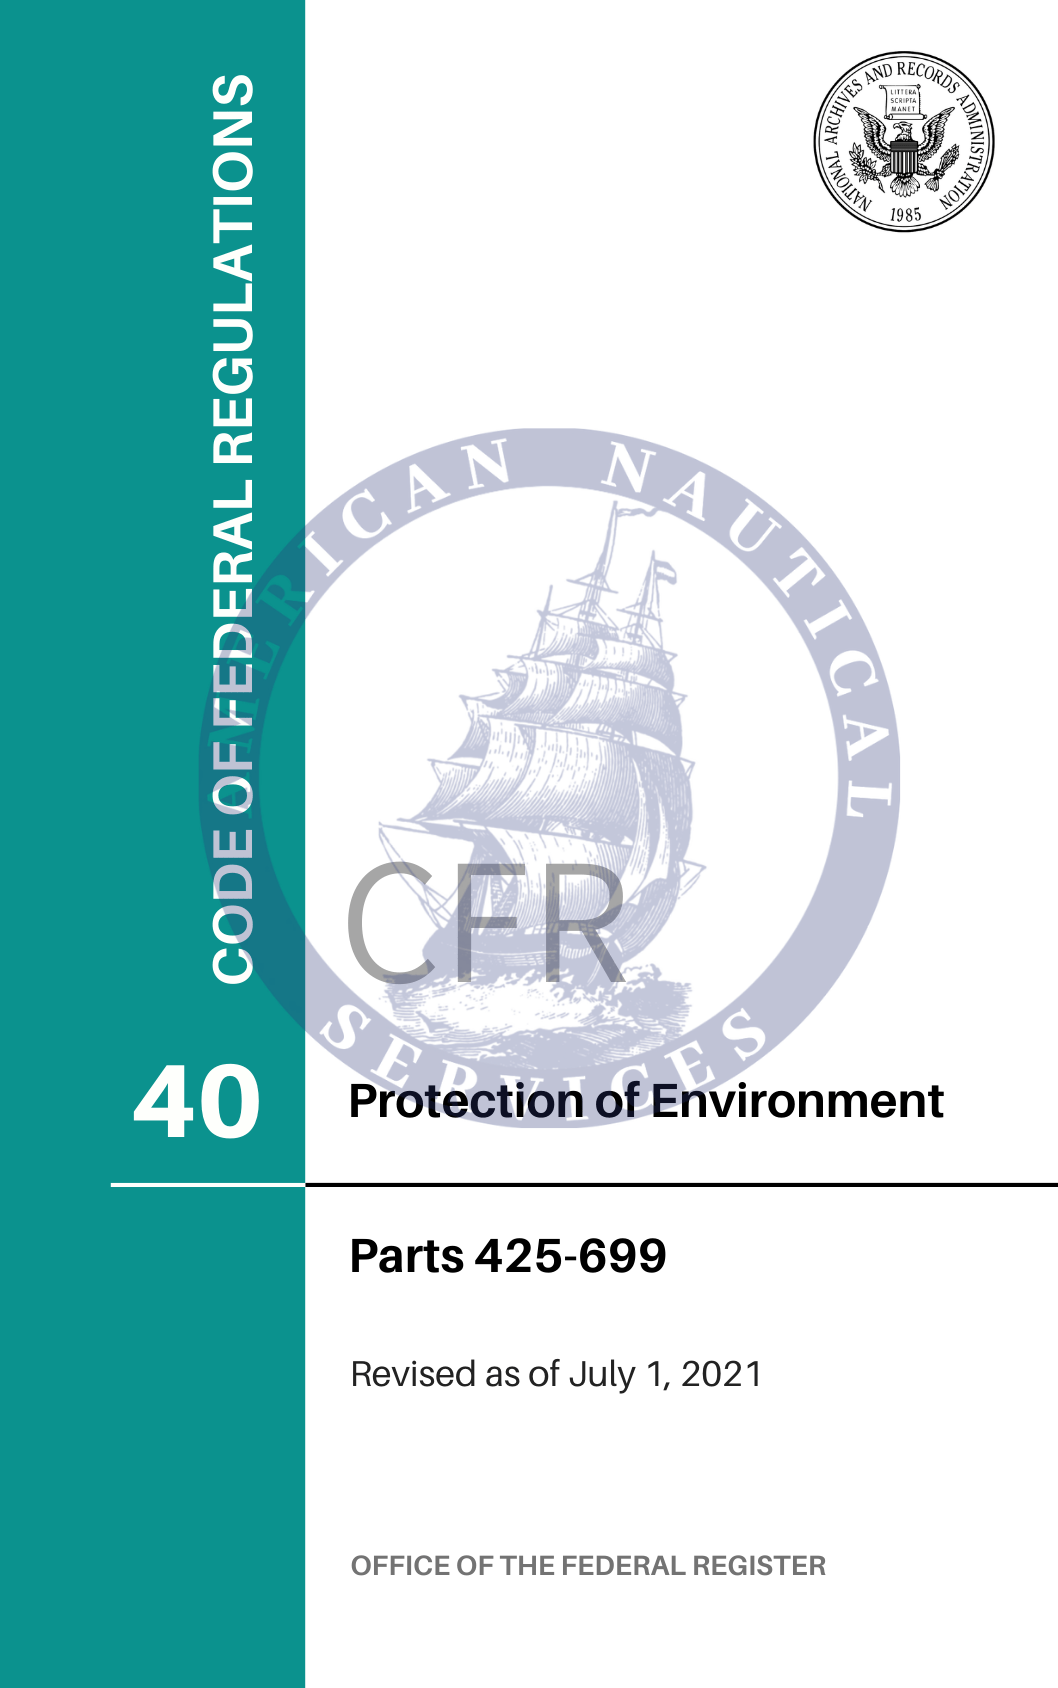 CFR Title 40: Parts 425-699 - Protection of Environment (Code of Federal Regulations), 2021 Edition